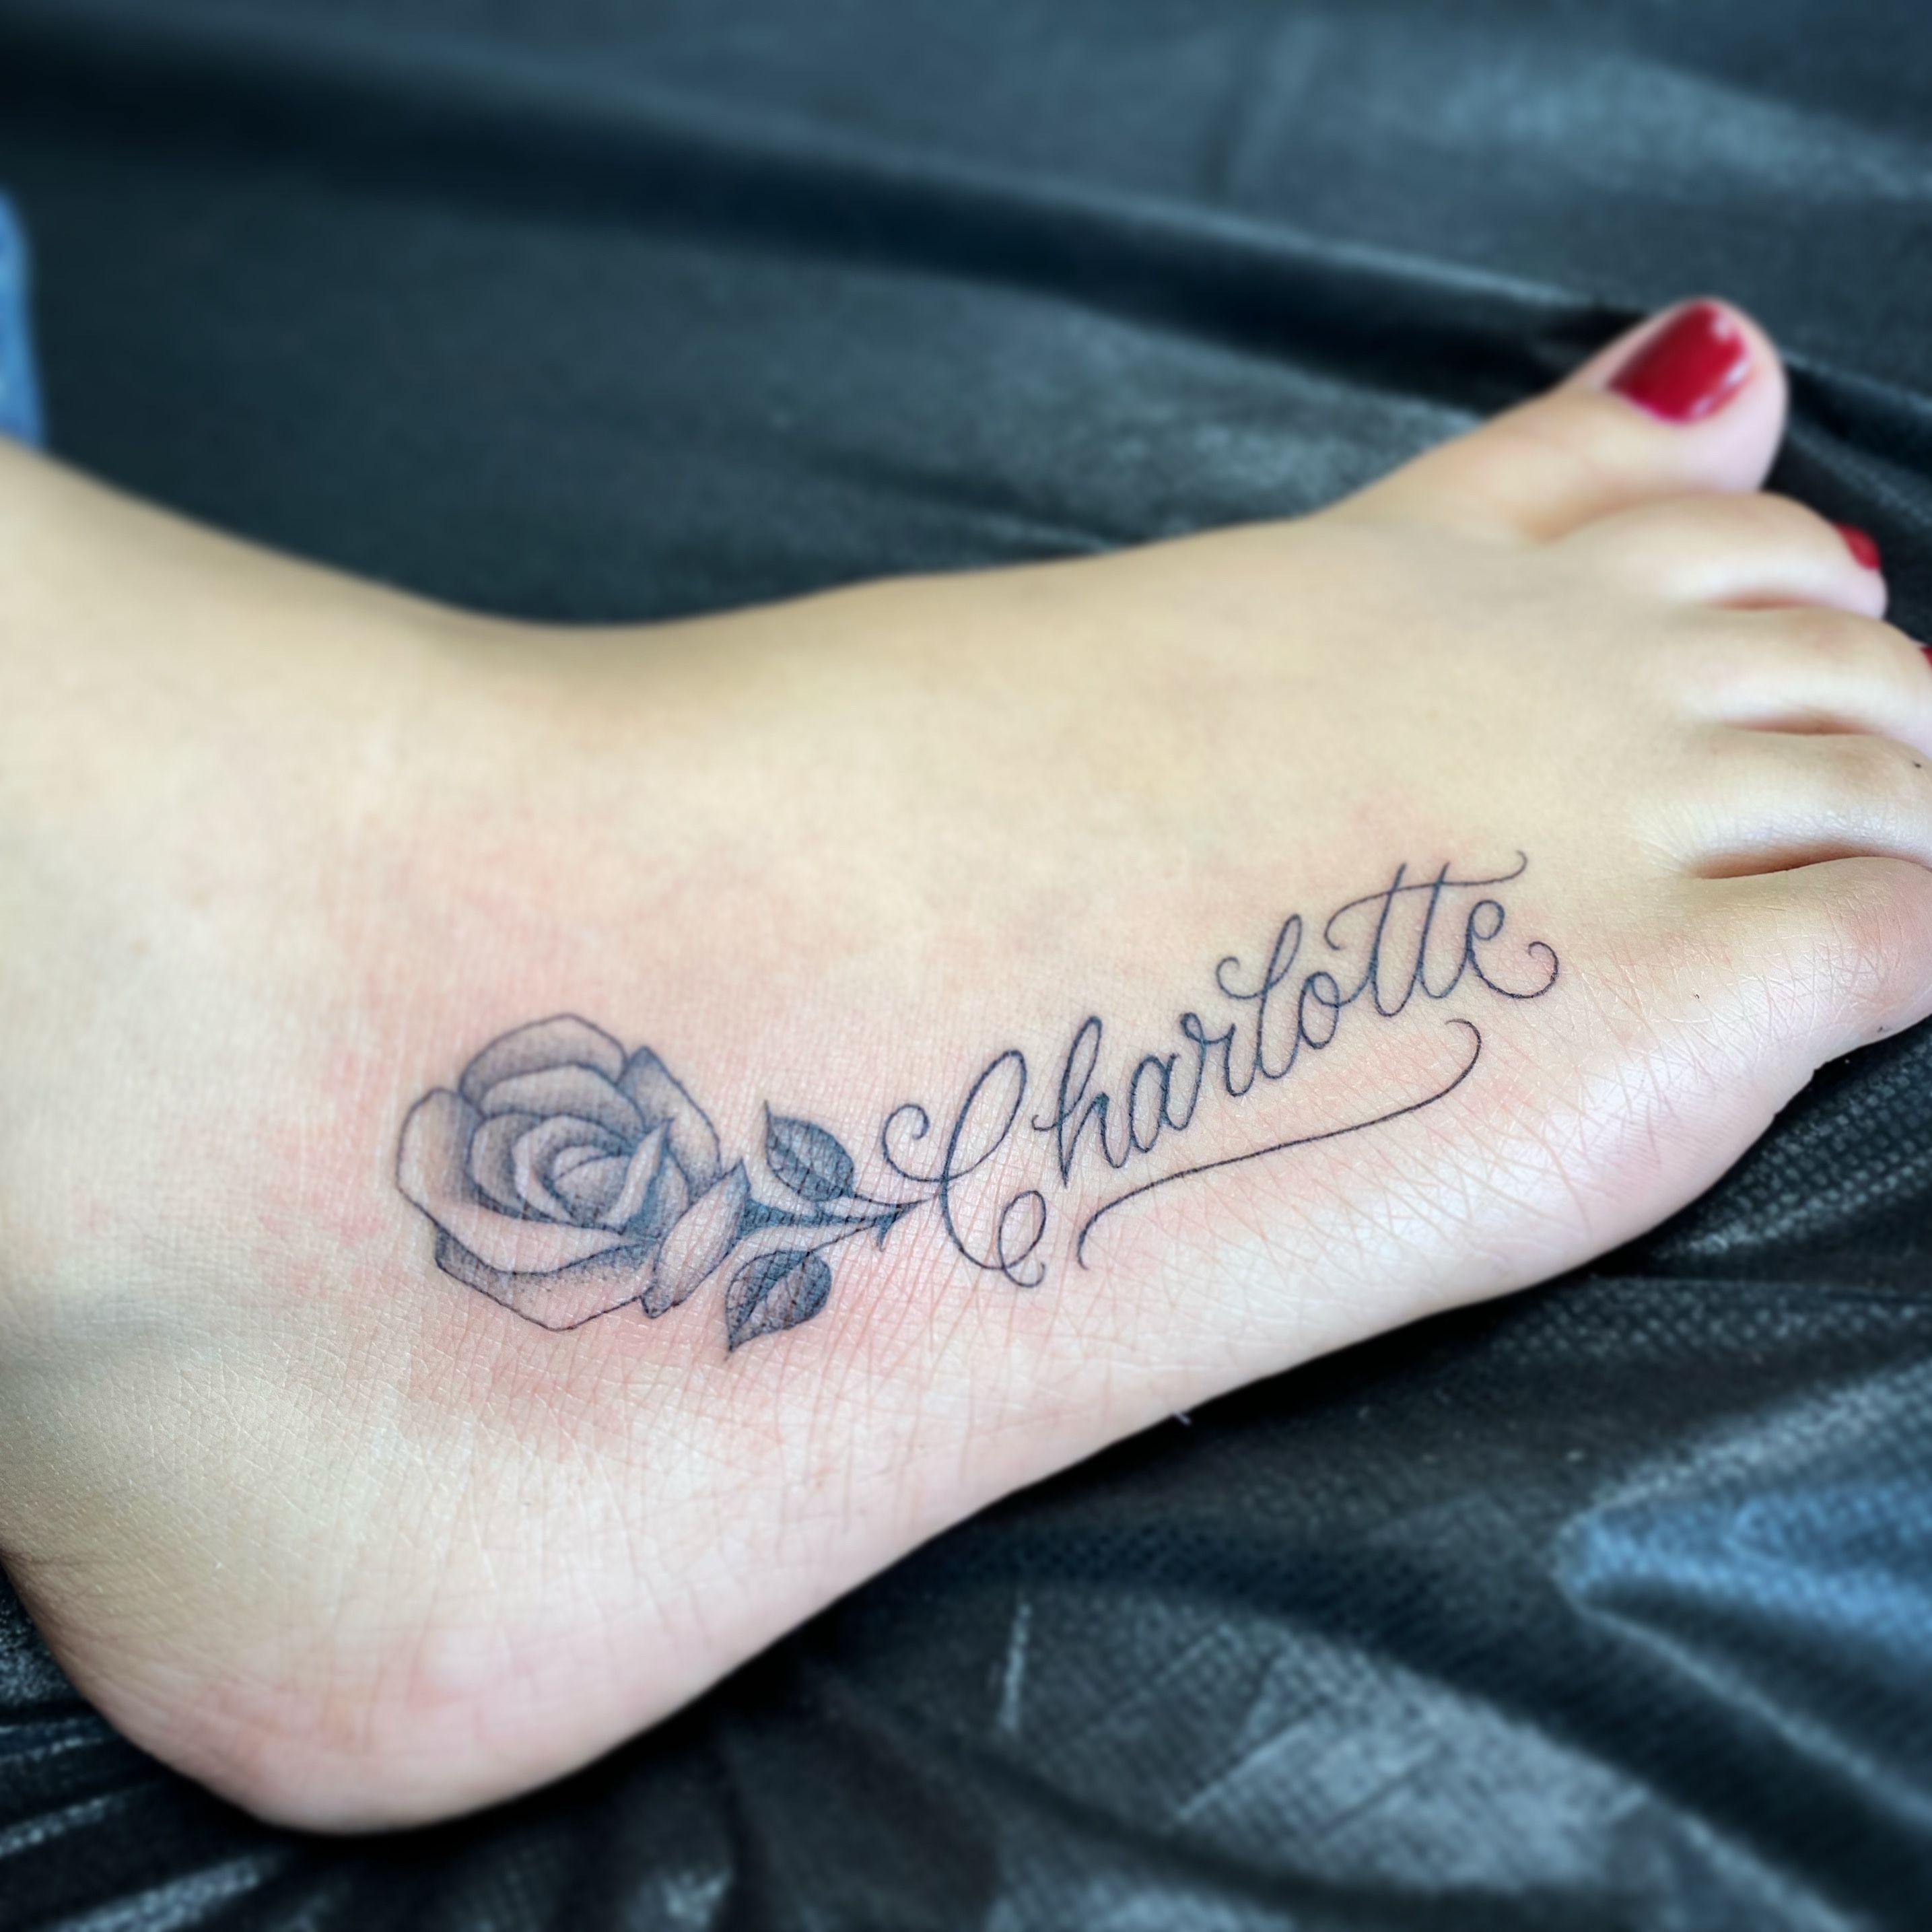 Tattoo uploaded by Charlotte Dolce  Beauty and the beast  Tattoodo